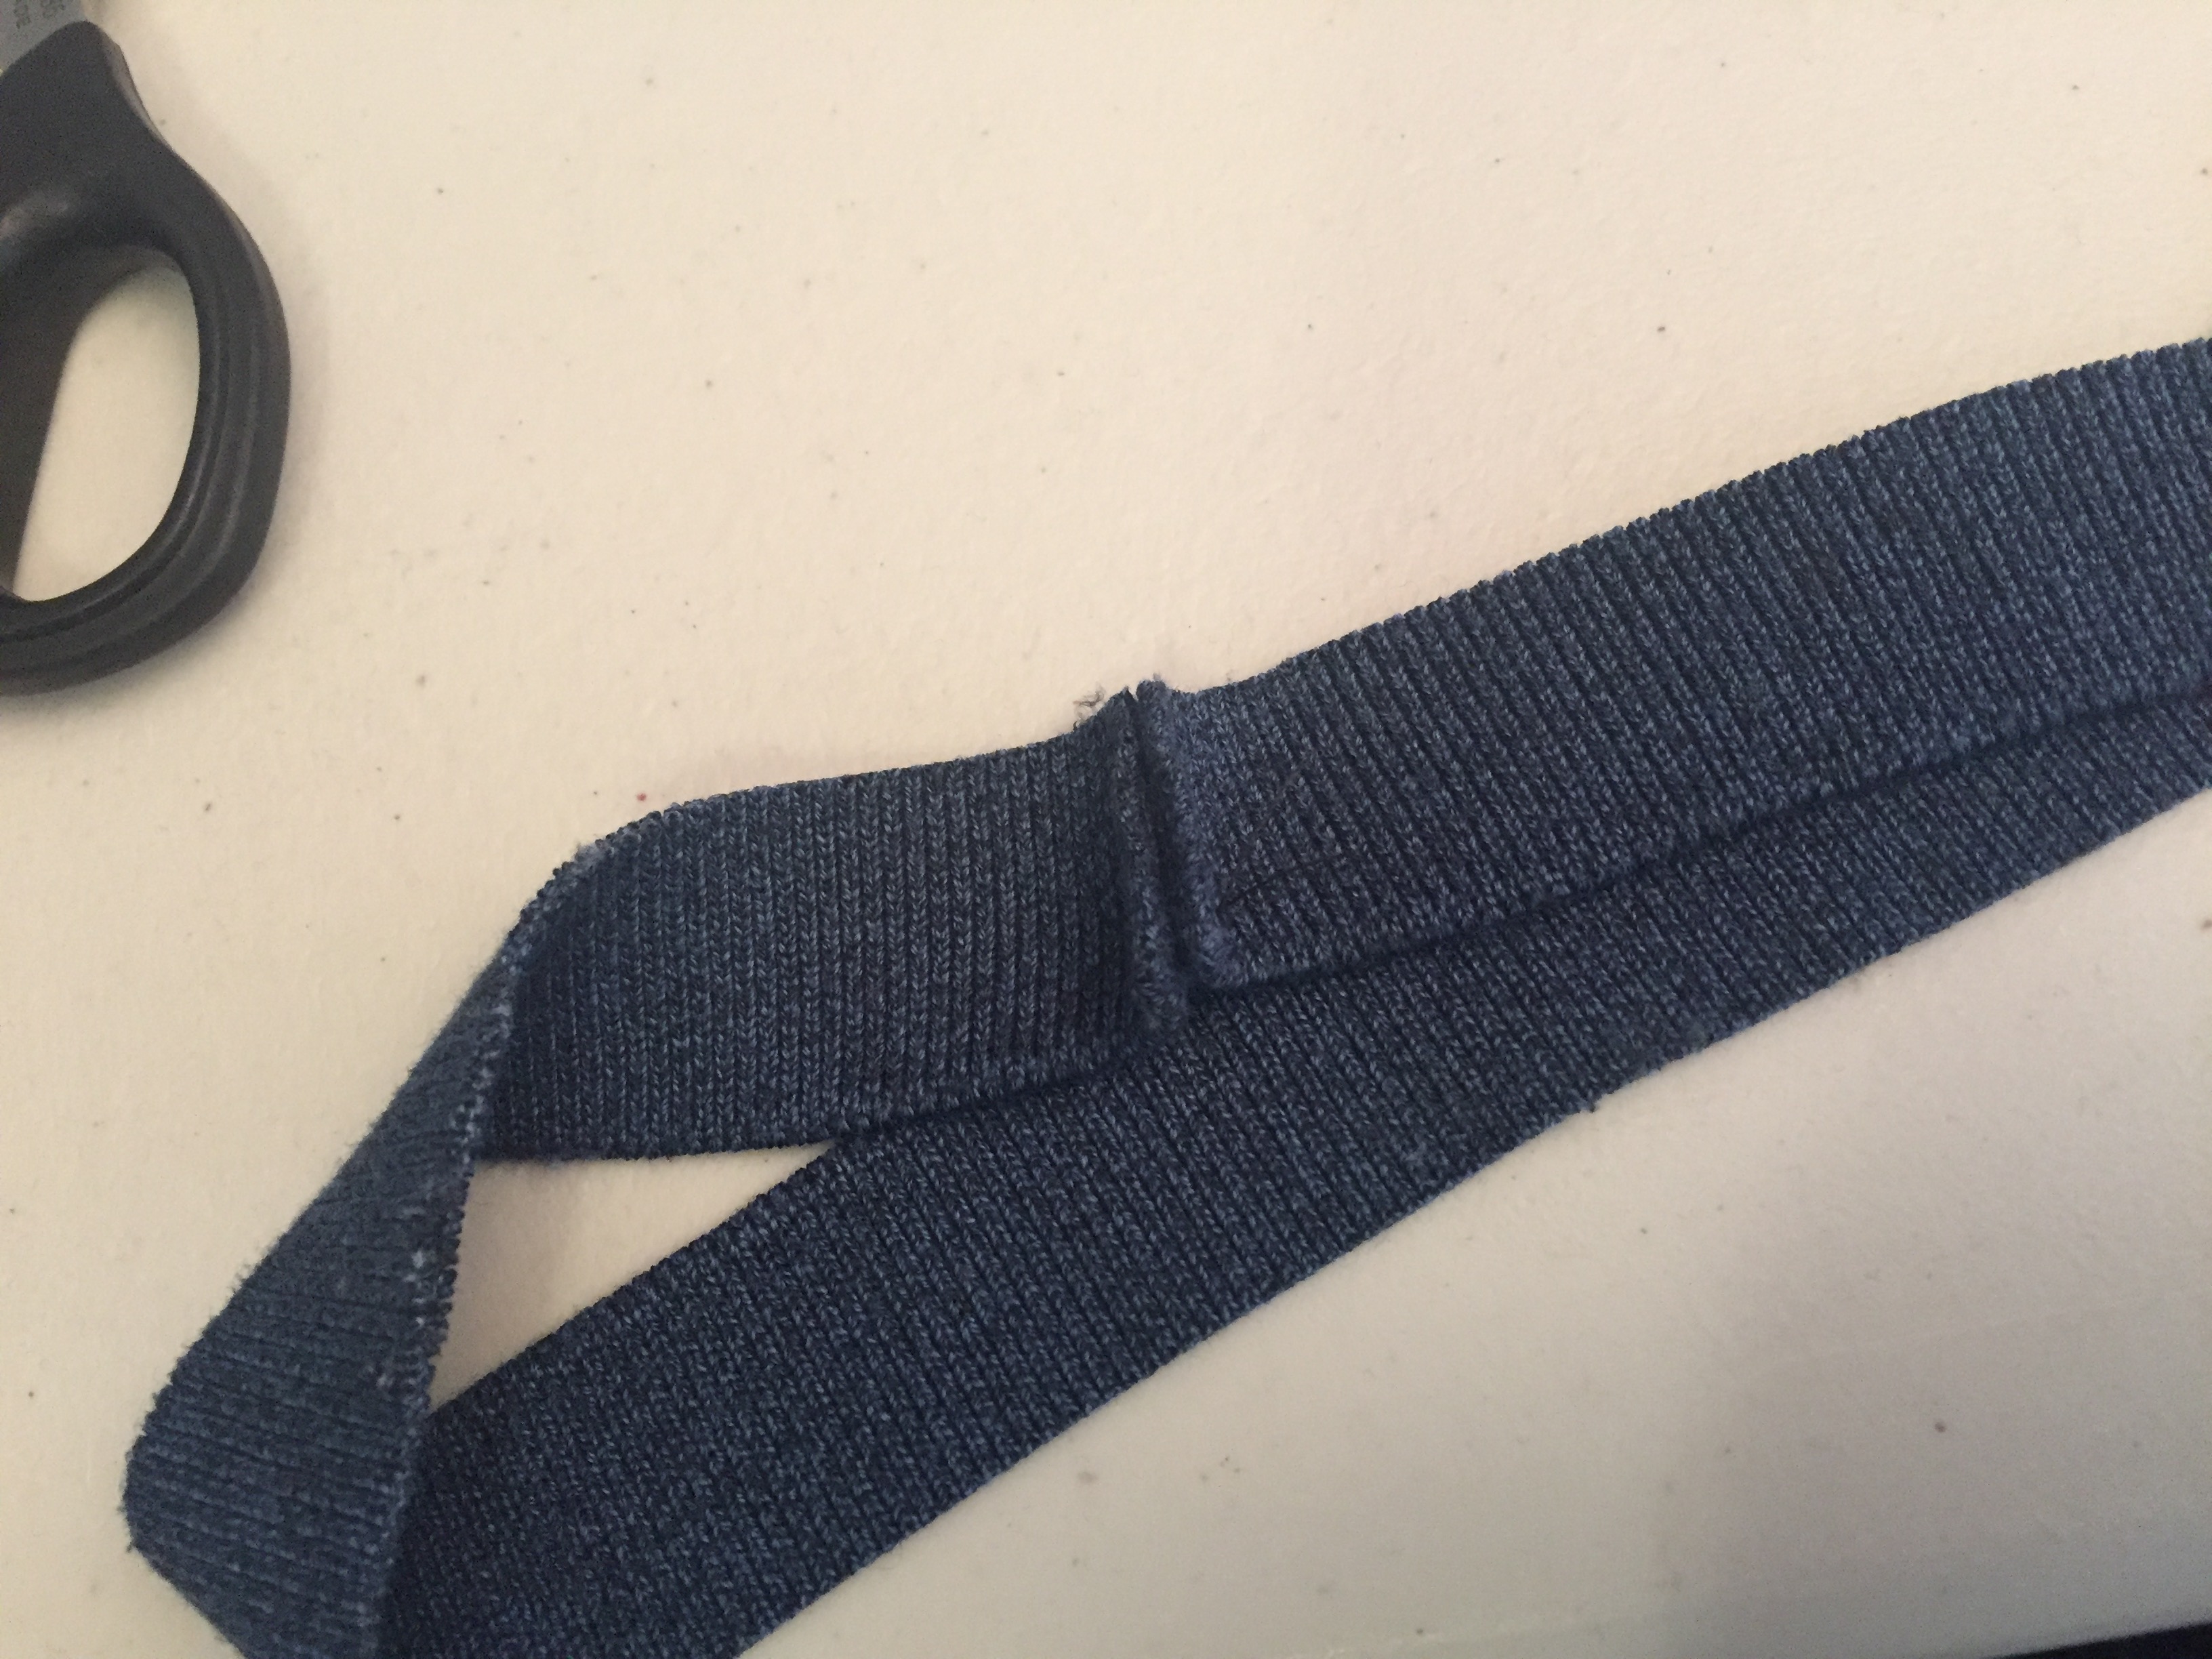 Neck band ends sewn together